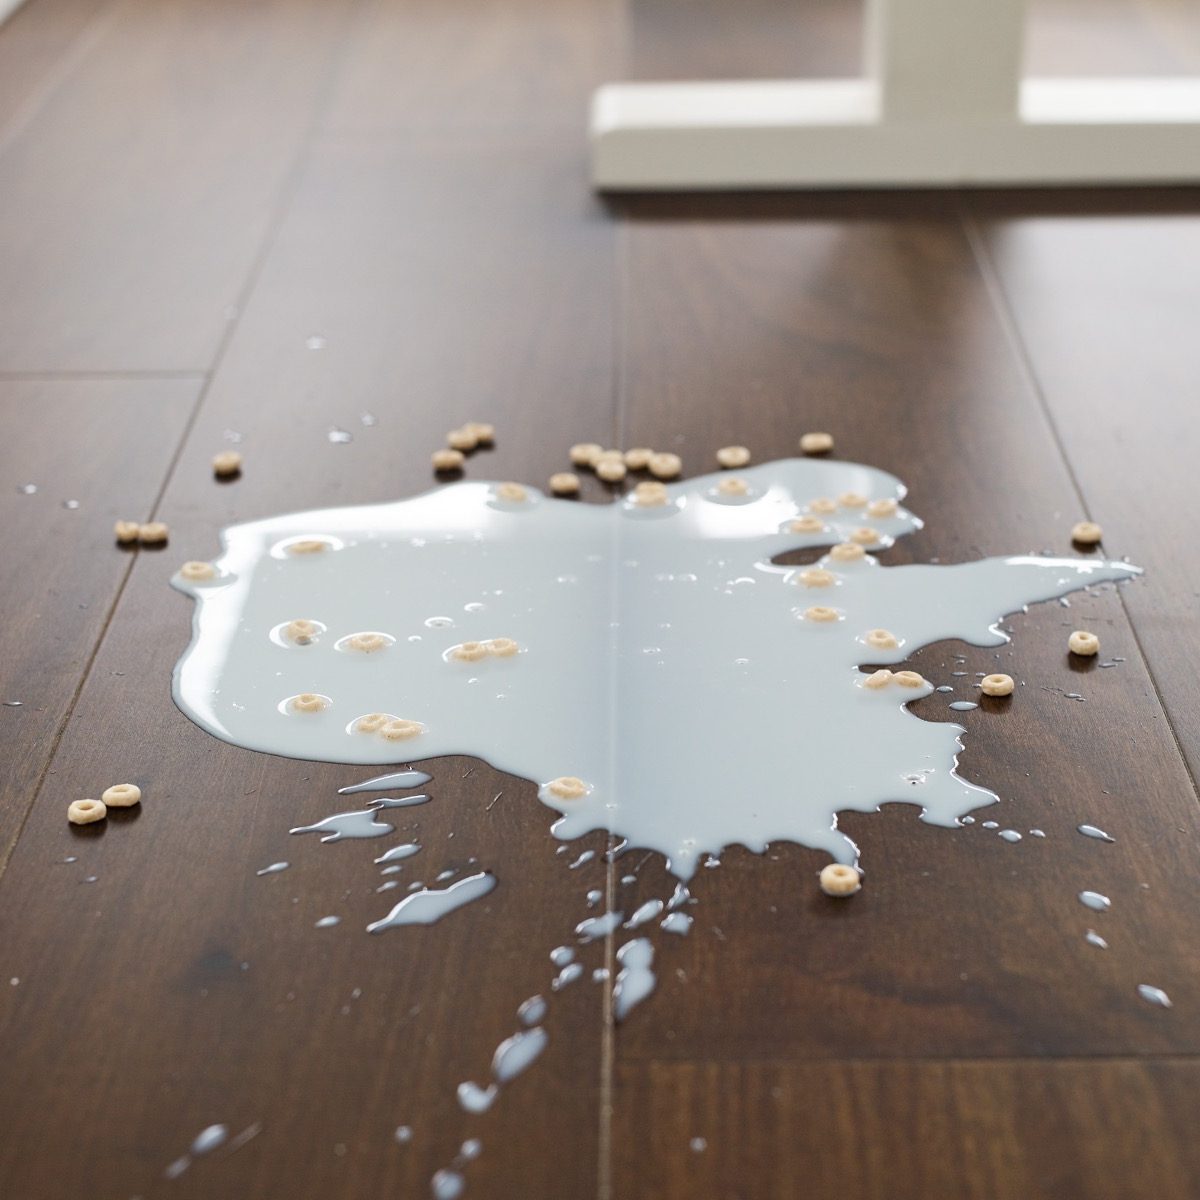 Cereal spill on the floor | Flooring 101